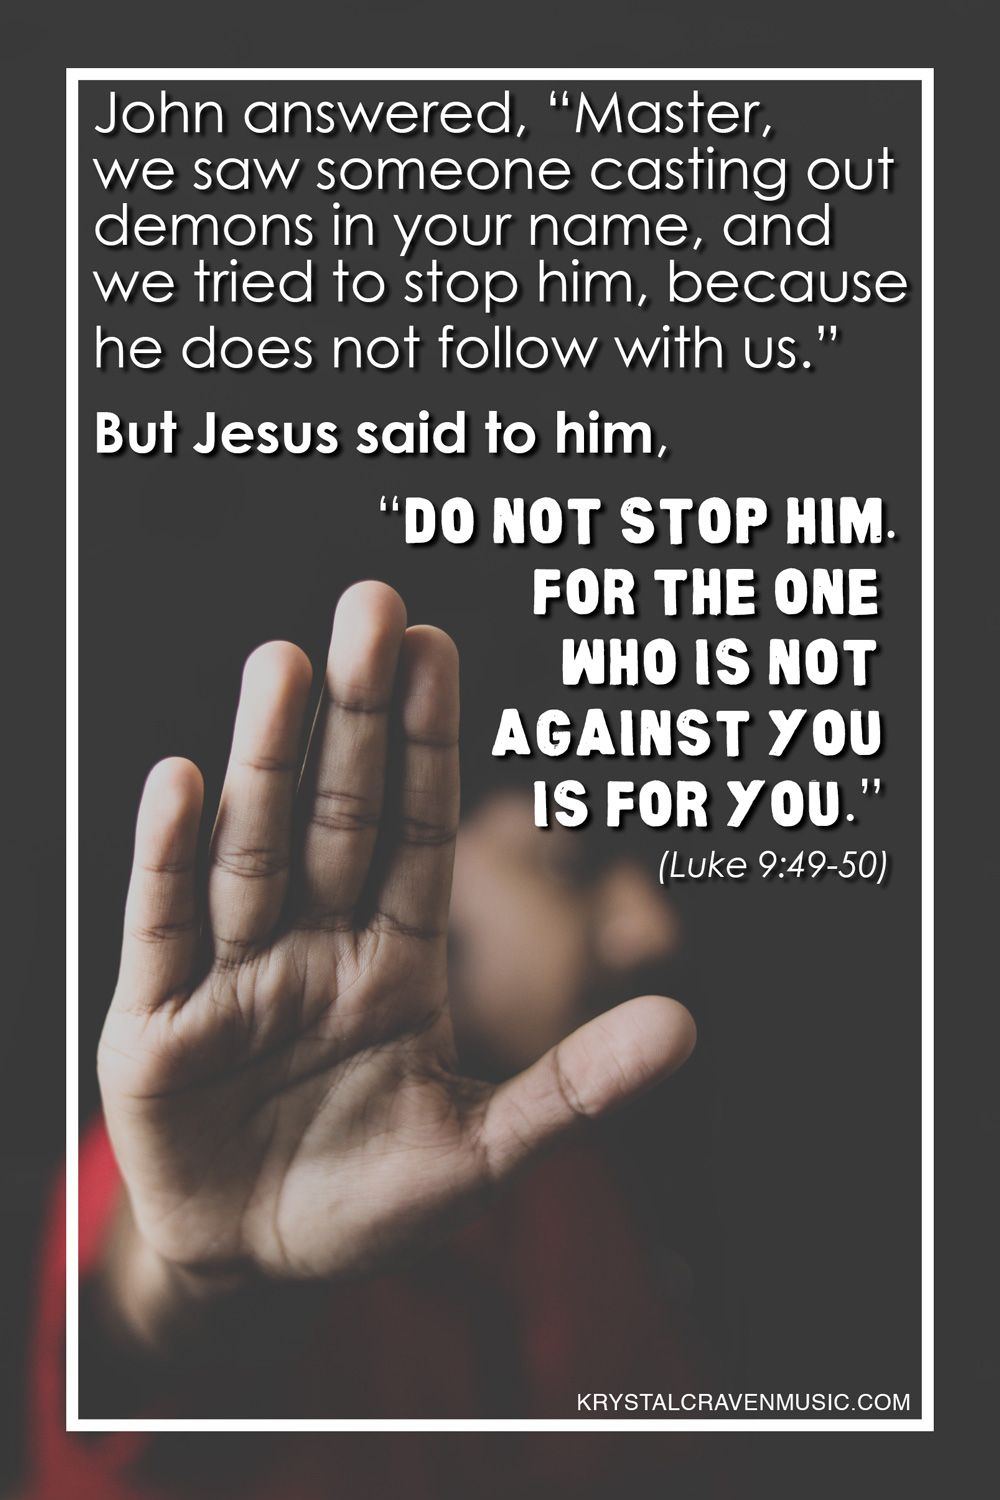 The Bible verse text from Luke 9:49-50, "John answered, “Master, we saw someone casting out demons in your name, and we tried to stop him, because he does not follow with us.” But Jesus said to him, “Do not stop him, for the one who is not against you is for you.”" in white text on a dark background. The text wraps an out of focus man holding his hand up in a stop gesture, the hand is in focus.